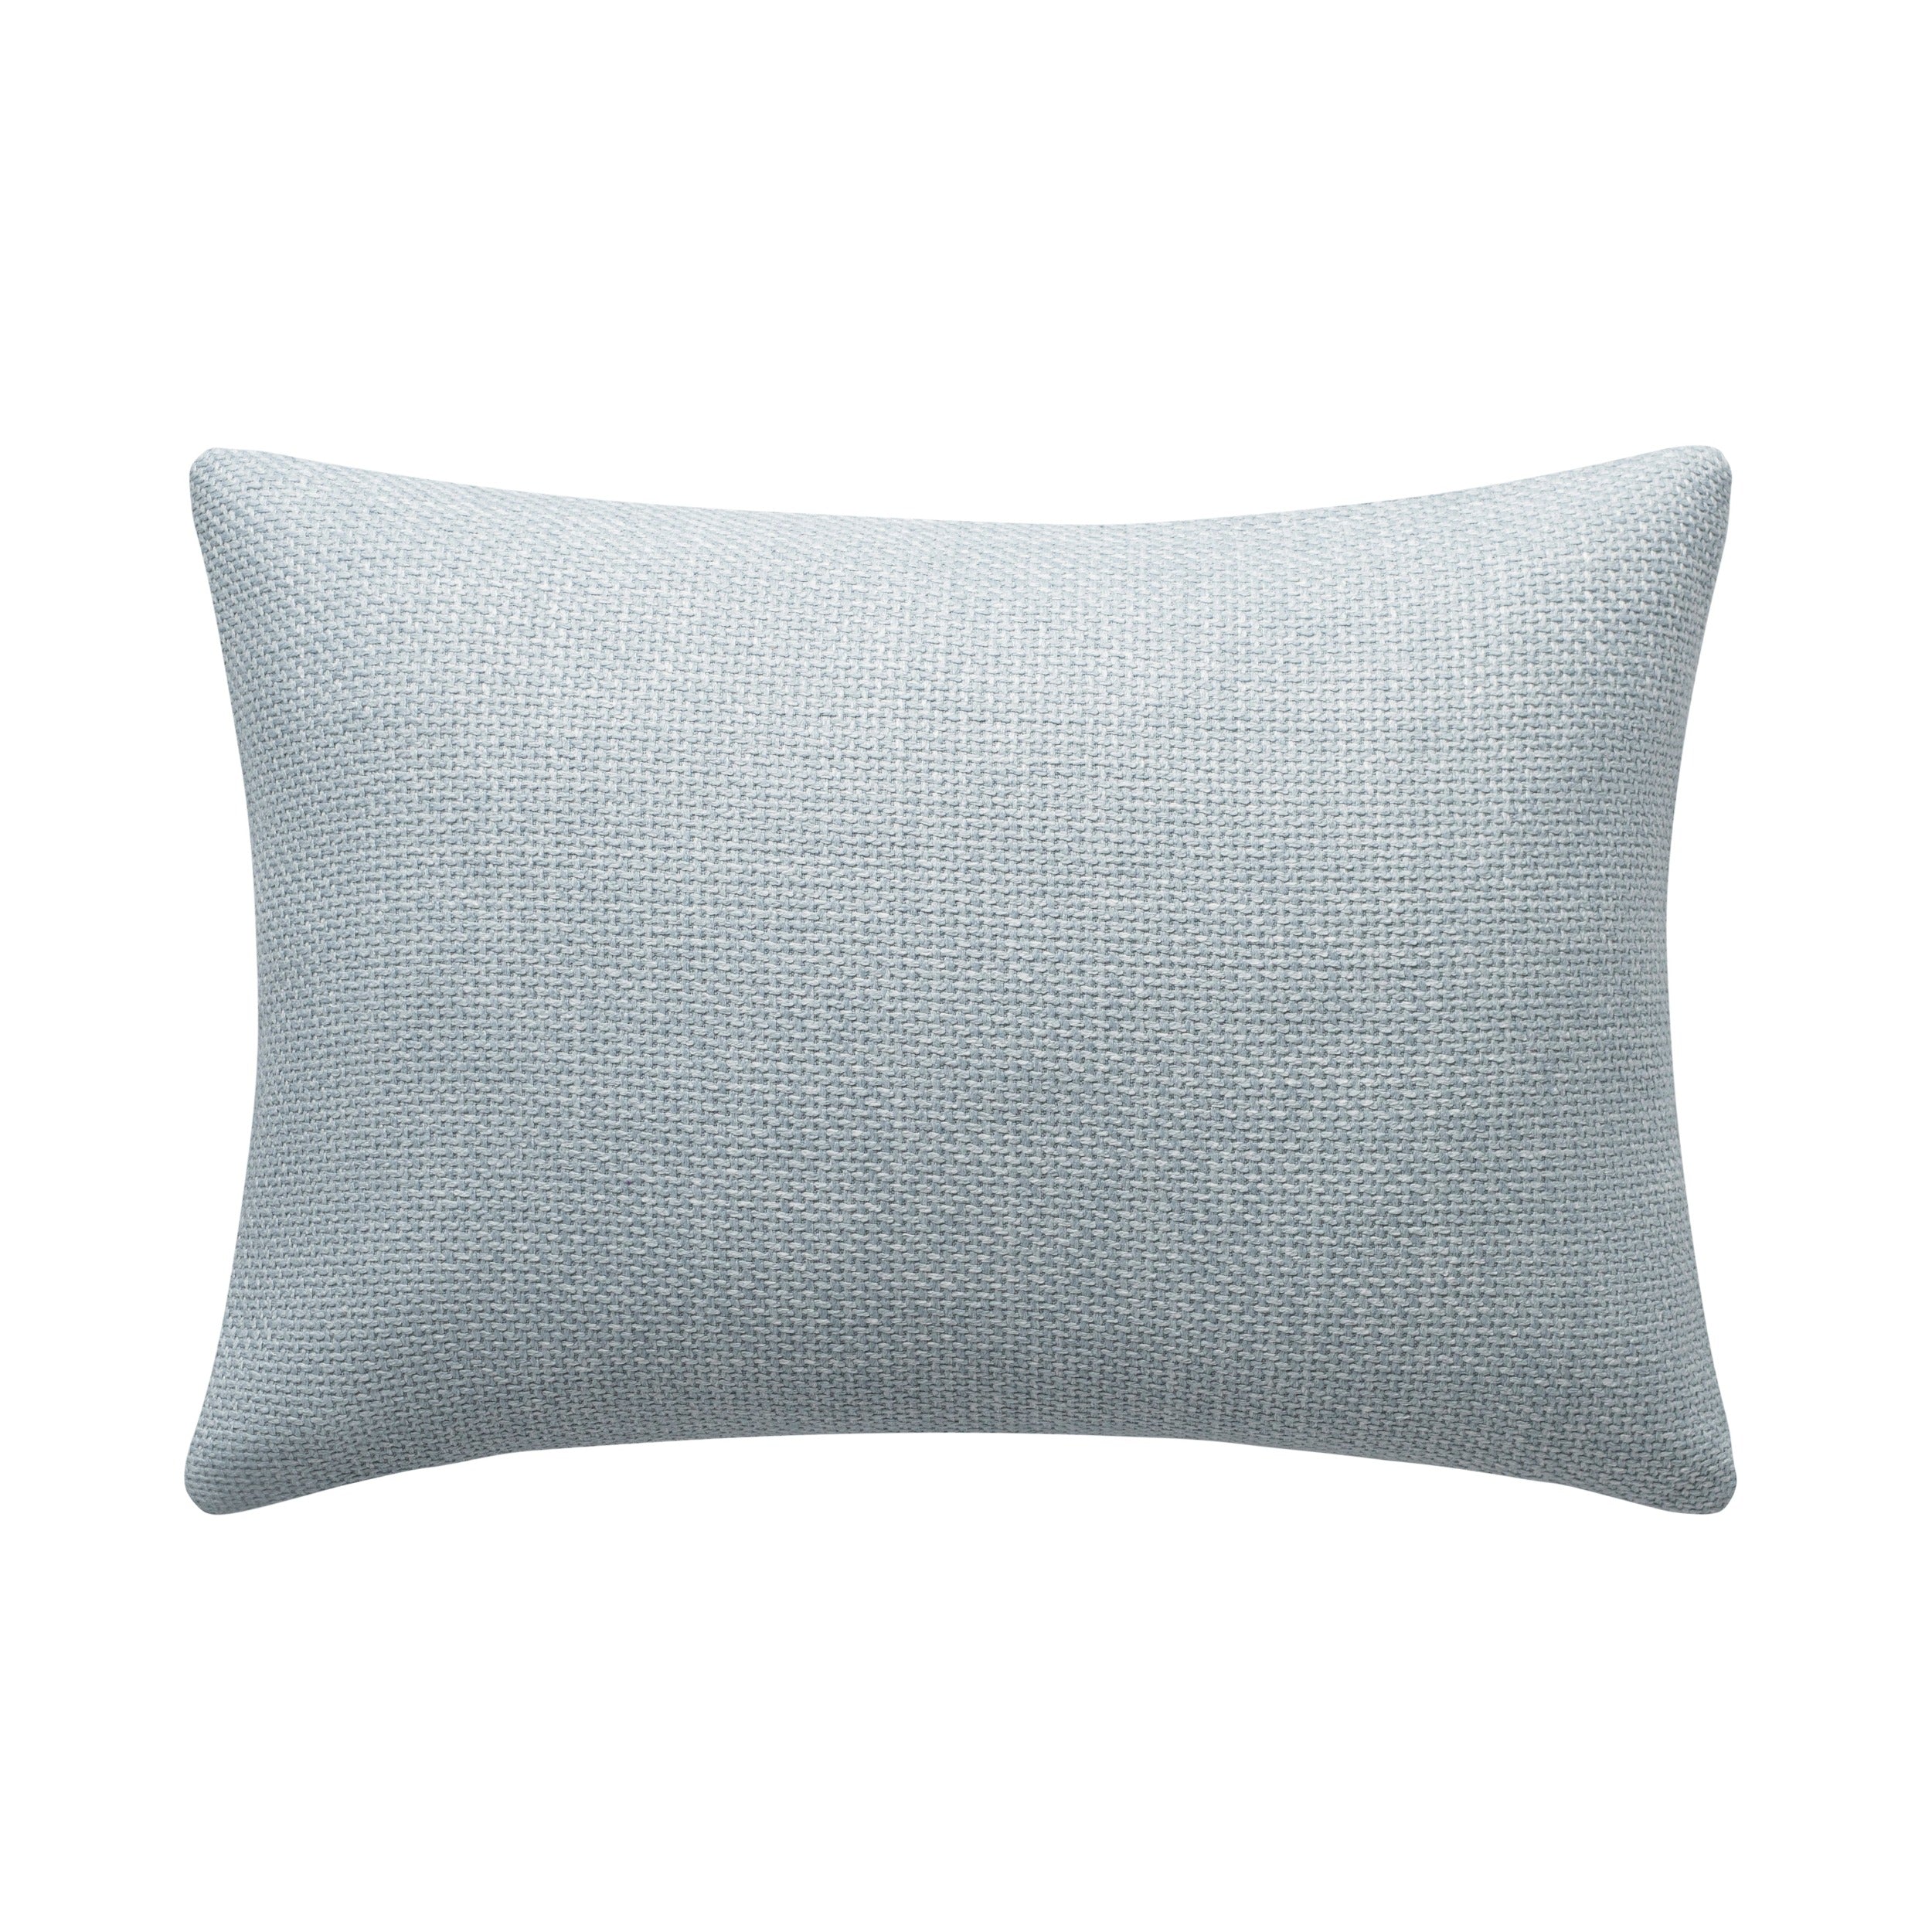 Petite Belle Sky Blue Textured Throw Pillow with White Piping